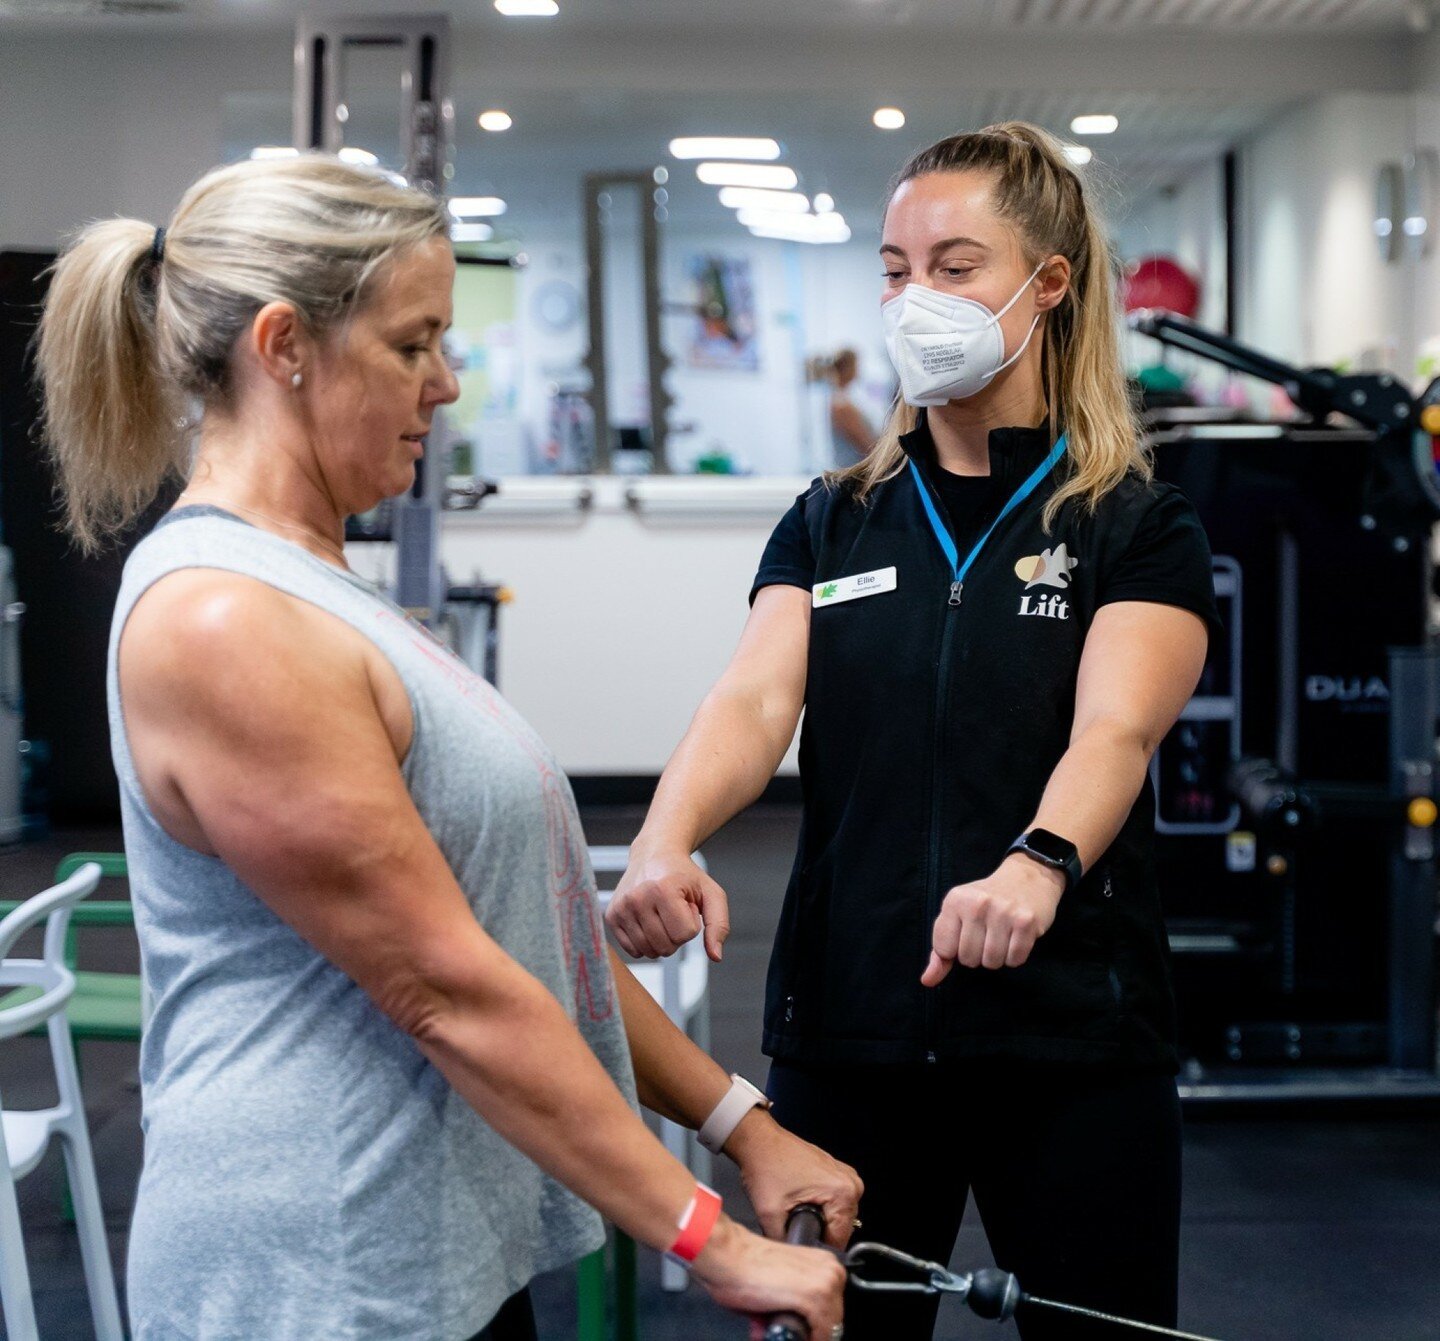 Did you know that Physiotherapy can help with a range of issues commonly experienced by people with breast cancer?

Physios are skilled in the assessment and treatment of a range of issues that result from breast cancer surgery including:
pain
scar t